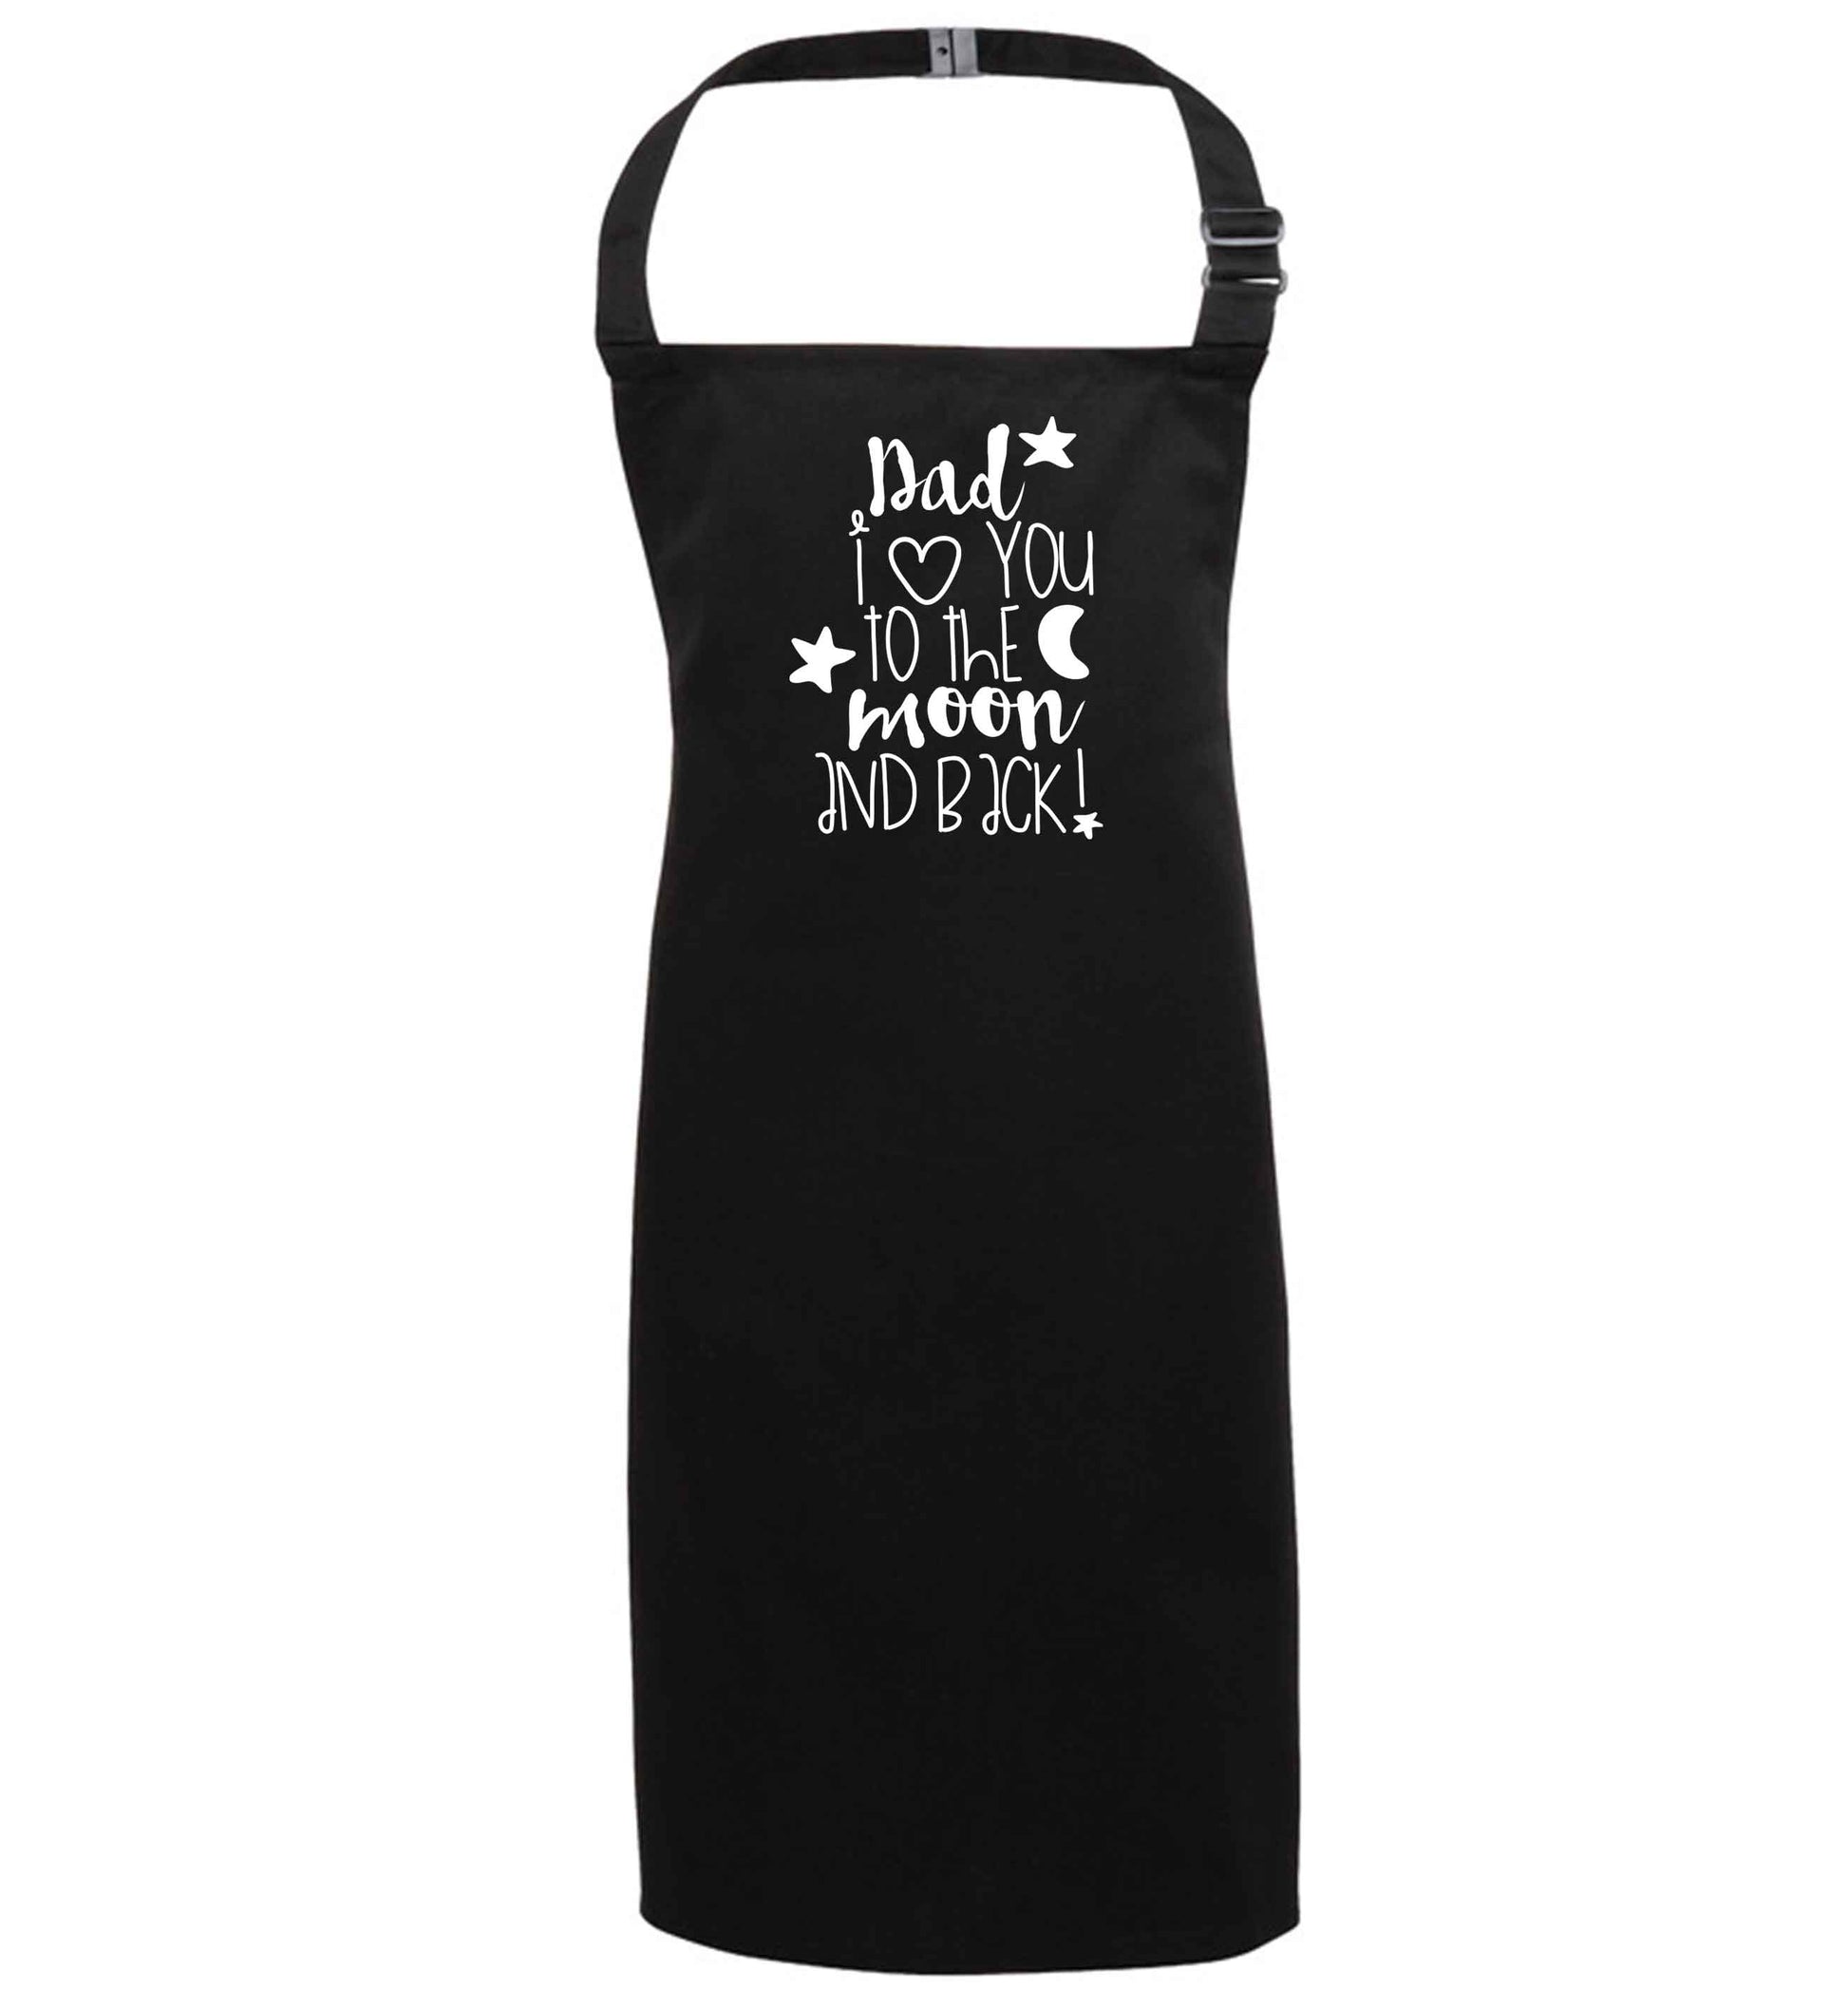 Dad I love you to the moon and back black apron 7-10 years